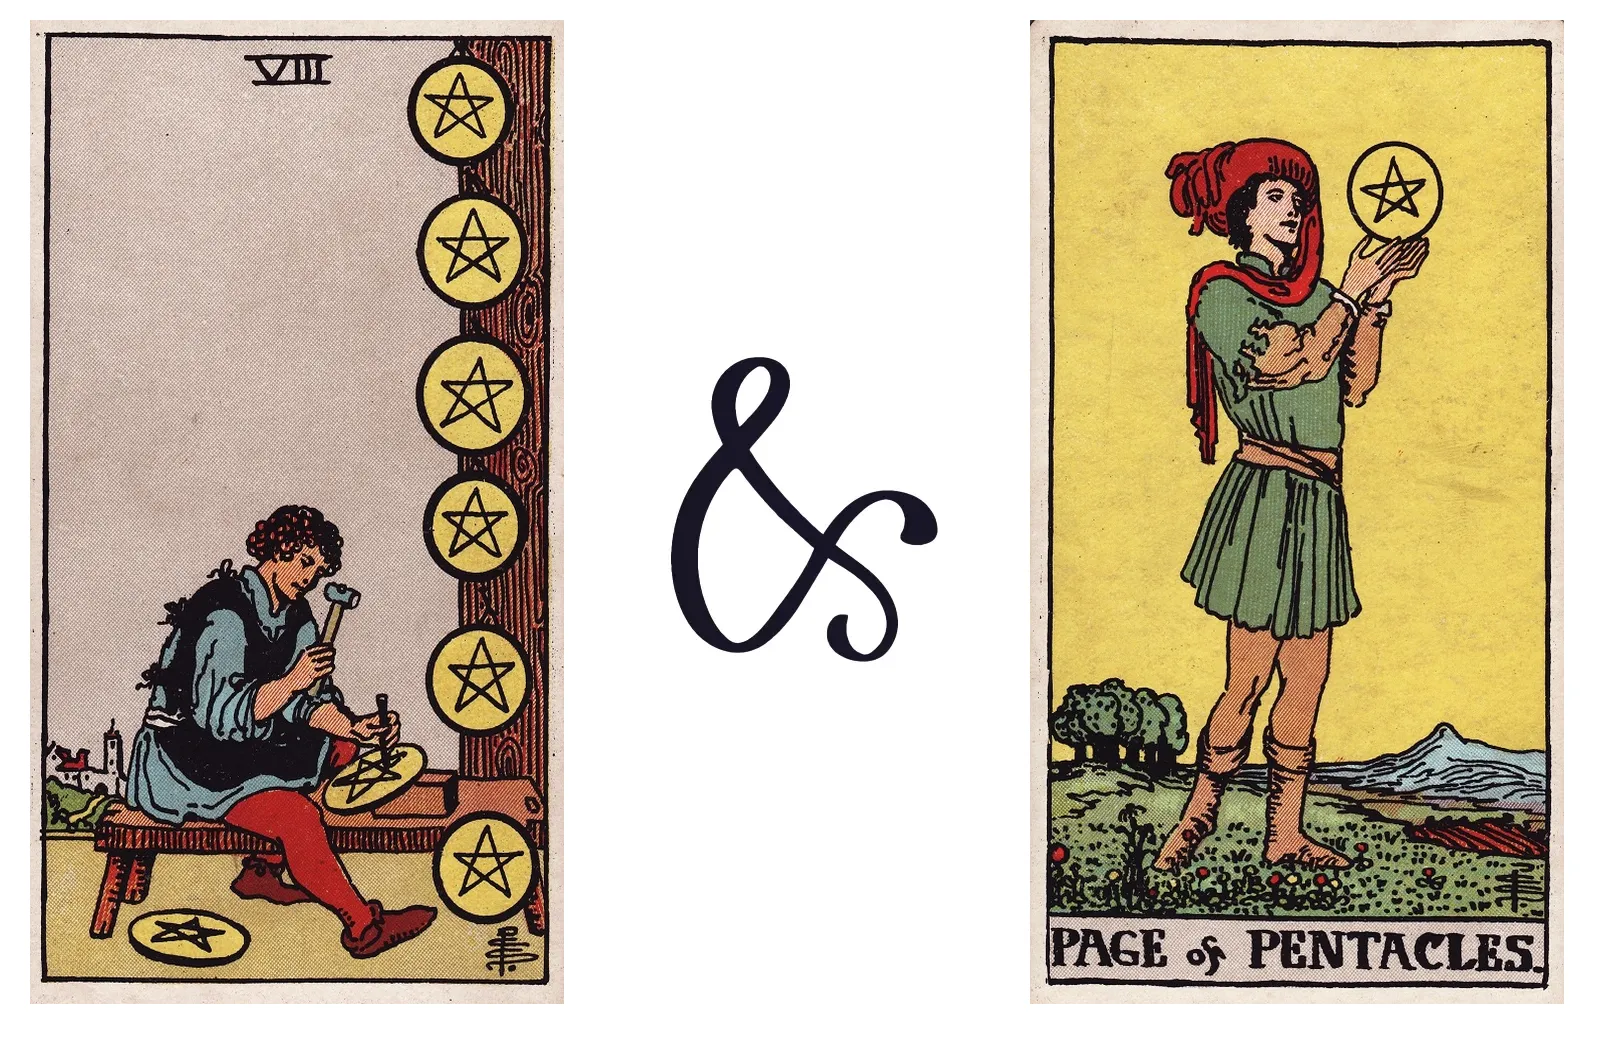 Eight of Pentacles and Page of Pentacles